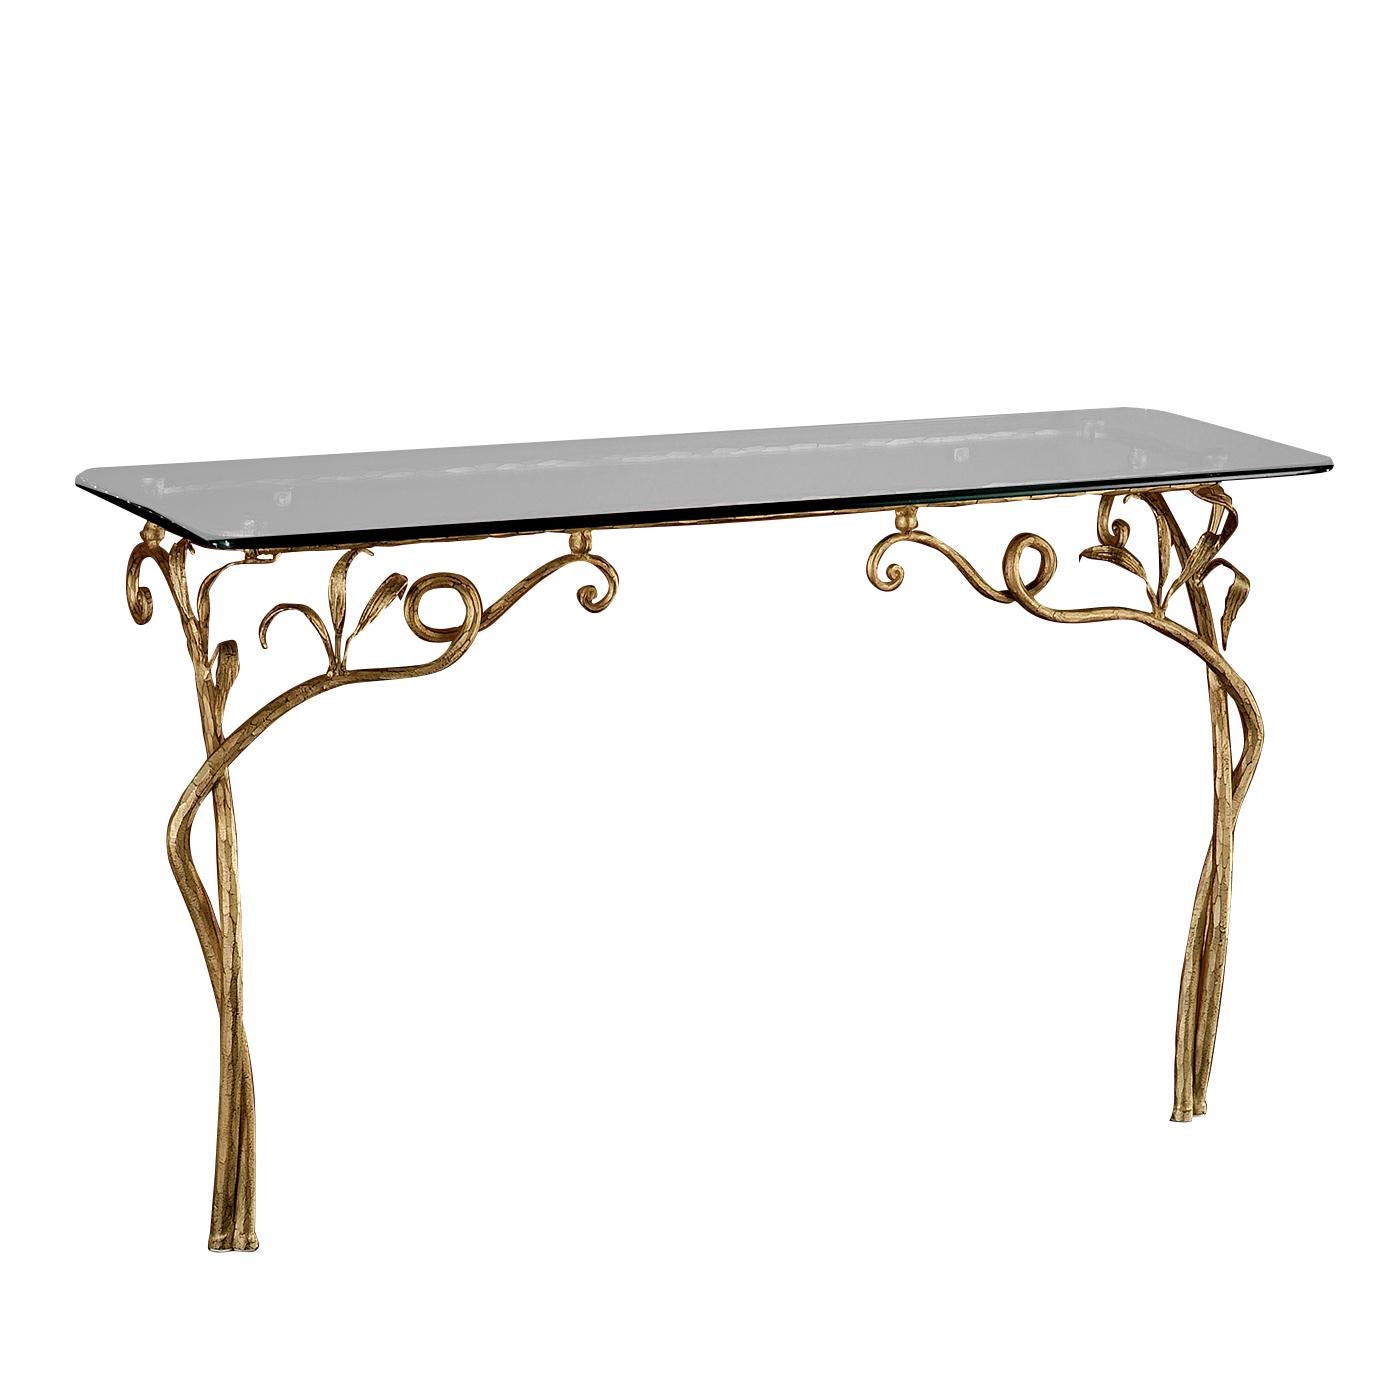 The delicate design of this elegant wall-mounted console will make a sophisticated impression in a classically-decorated home, displayed in an entryway or living room paired with the Glass Table in the same series. The transparent glass top, with